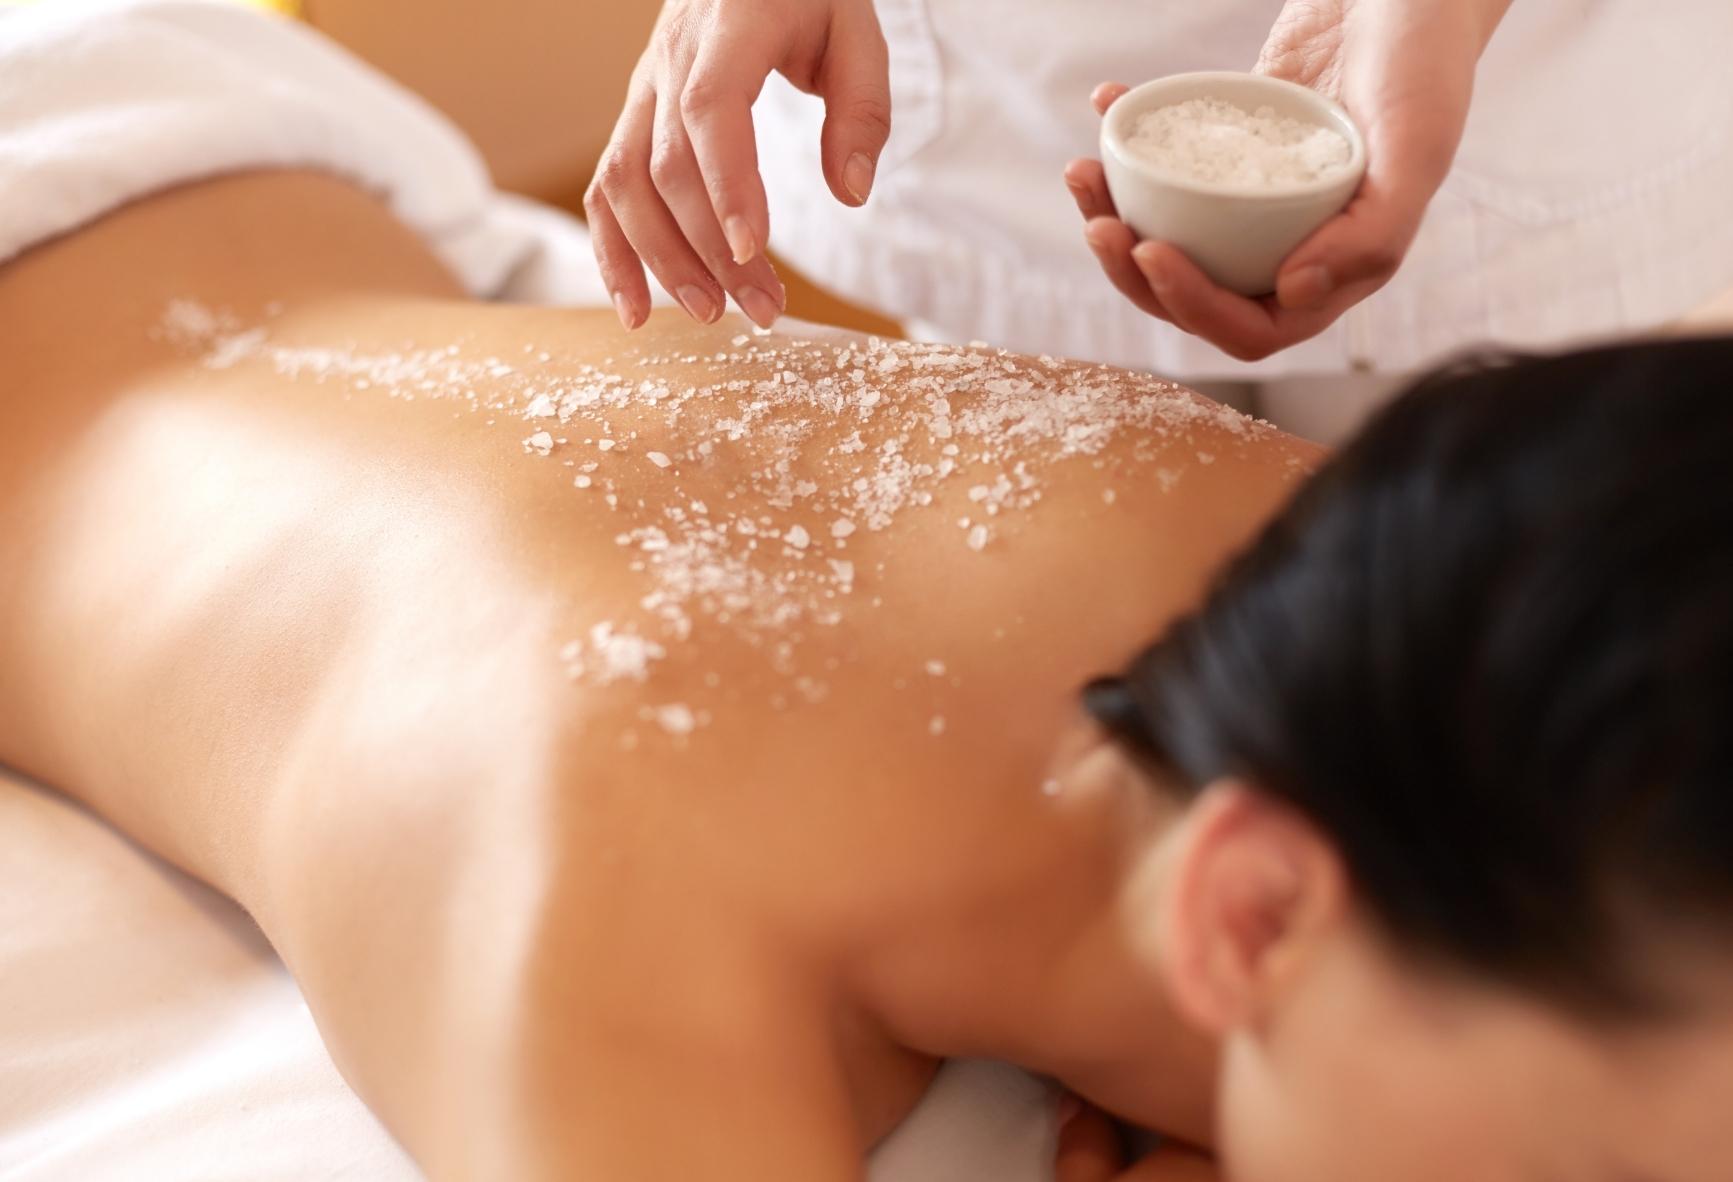 Woman lying face down on massage table with salt scrub applied to her back